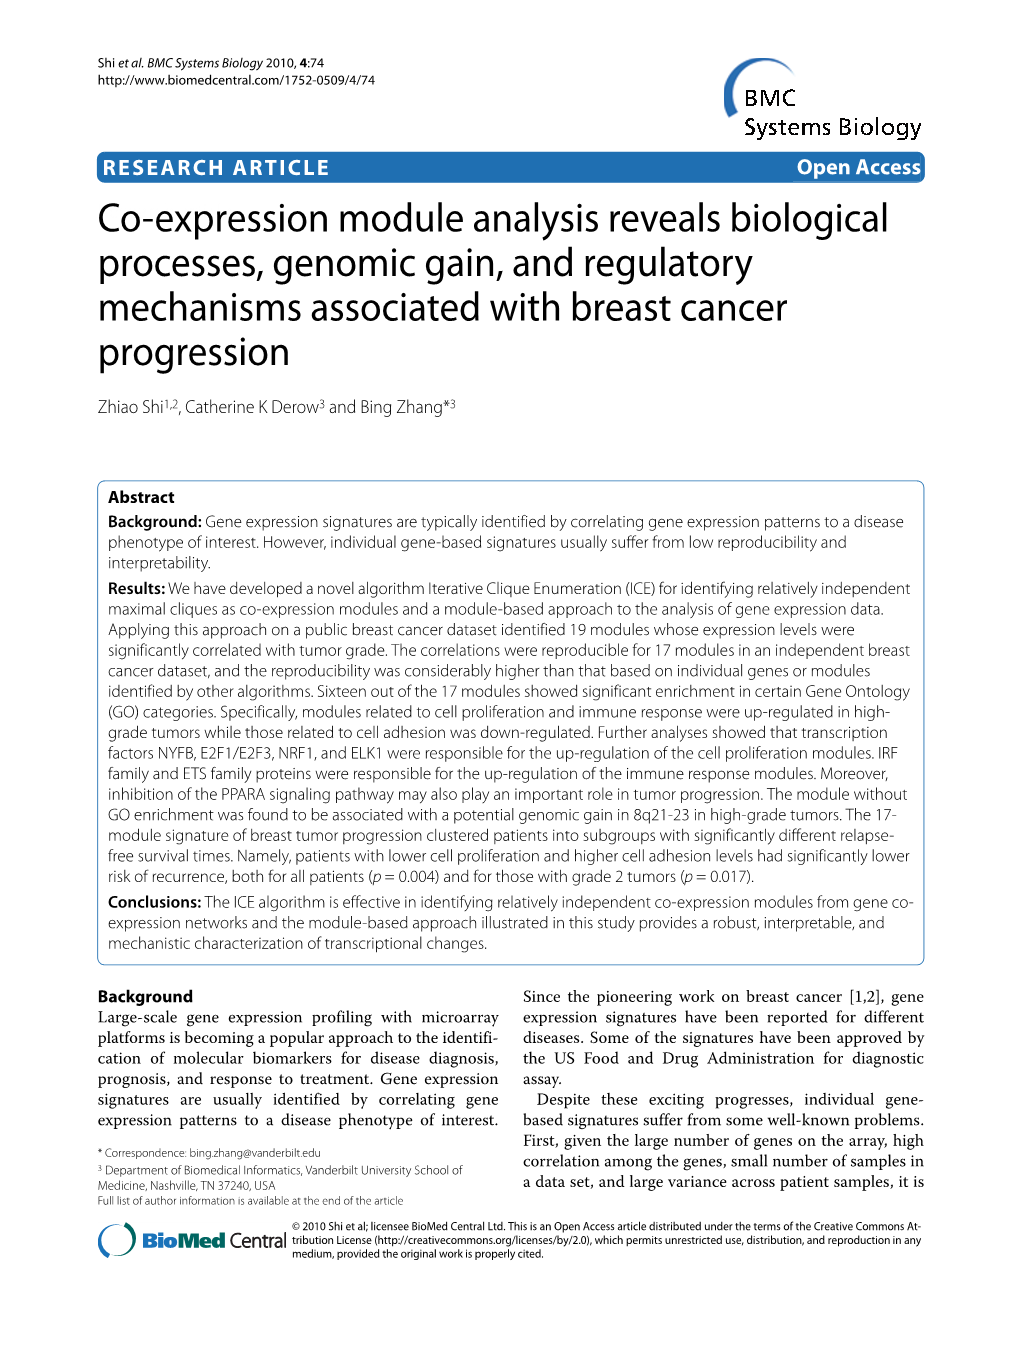 Co-Expression Module Analysis Reveals Biological Processes